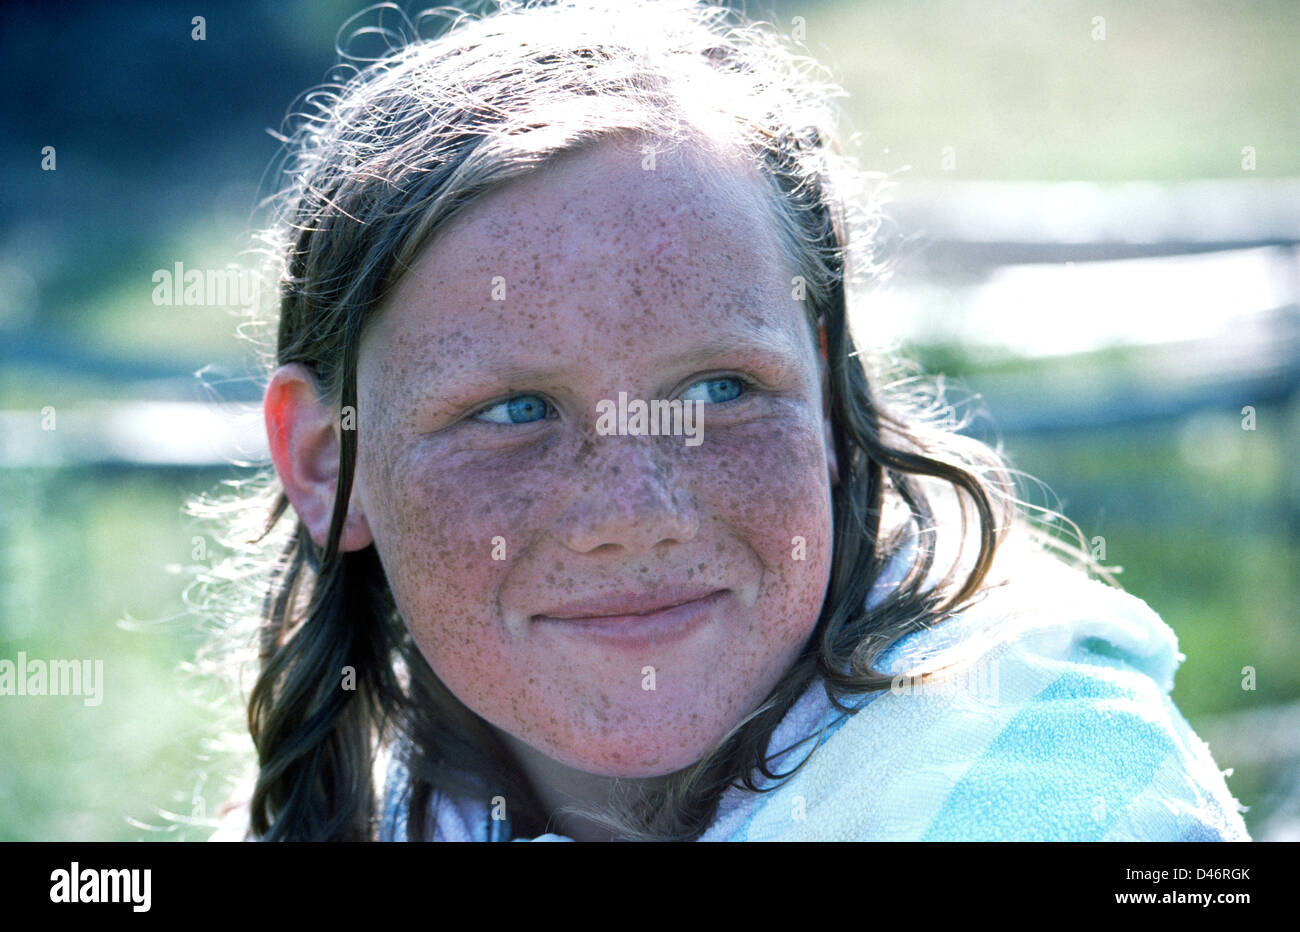 Freckles cover the face of a young German girl who spends summers in the sun ...